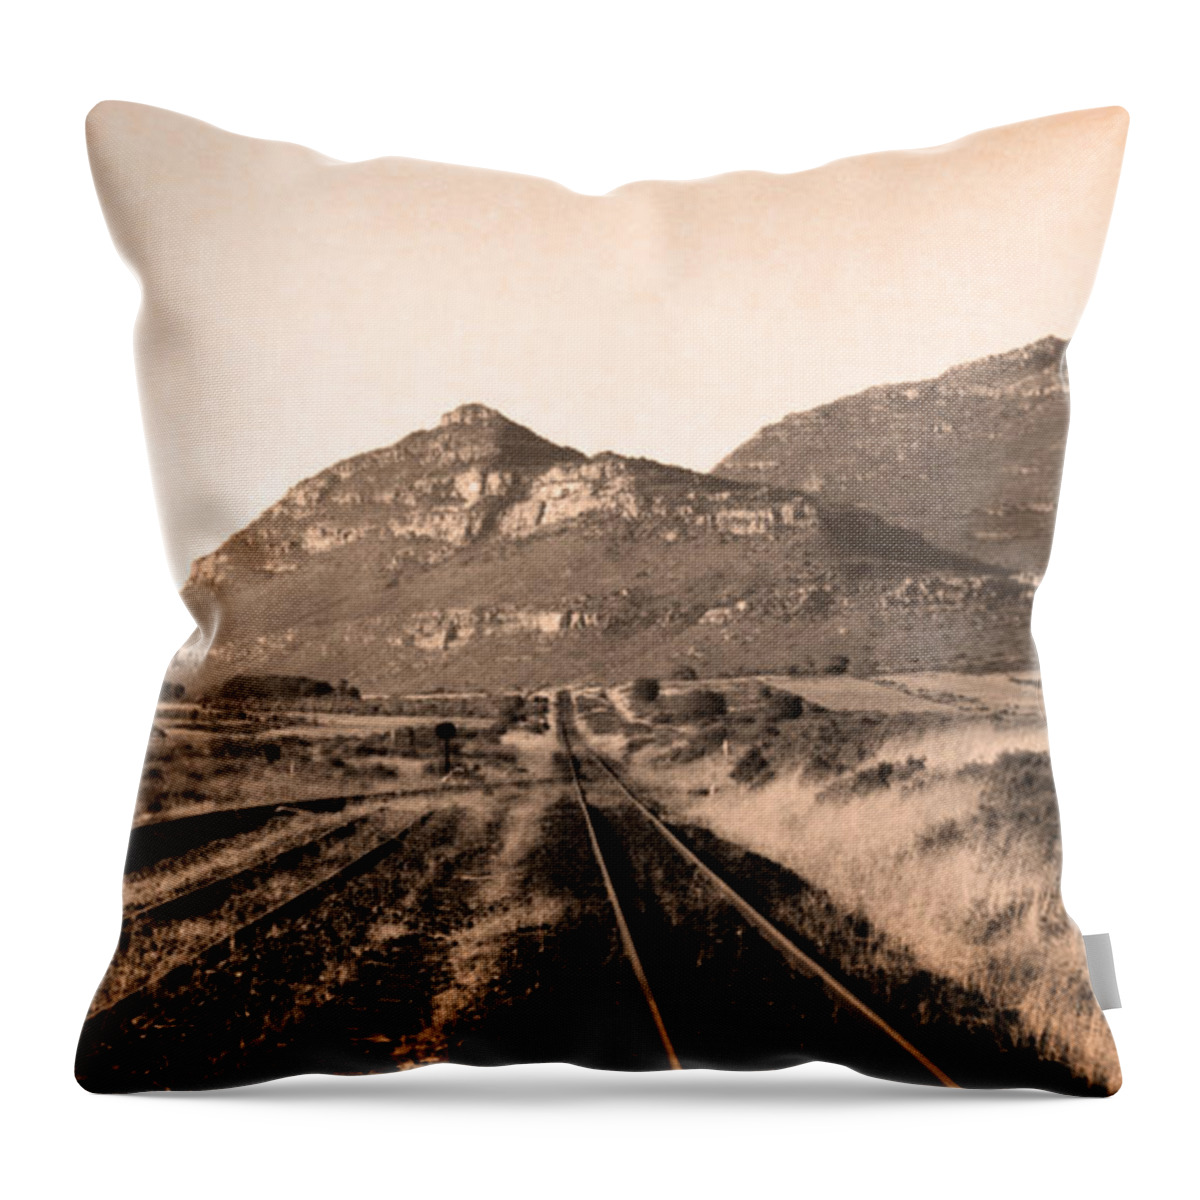 Desert Throw Pillow featuring the digital art Skurfkop Karoo South Africa by Vincent Franco